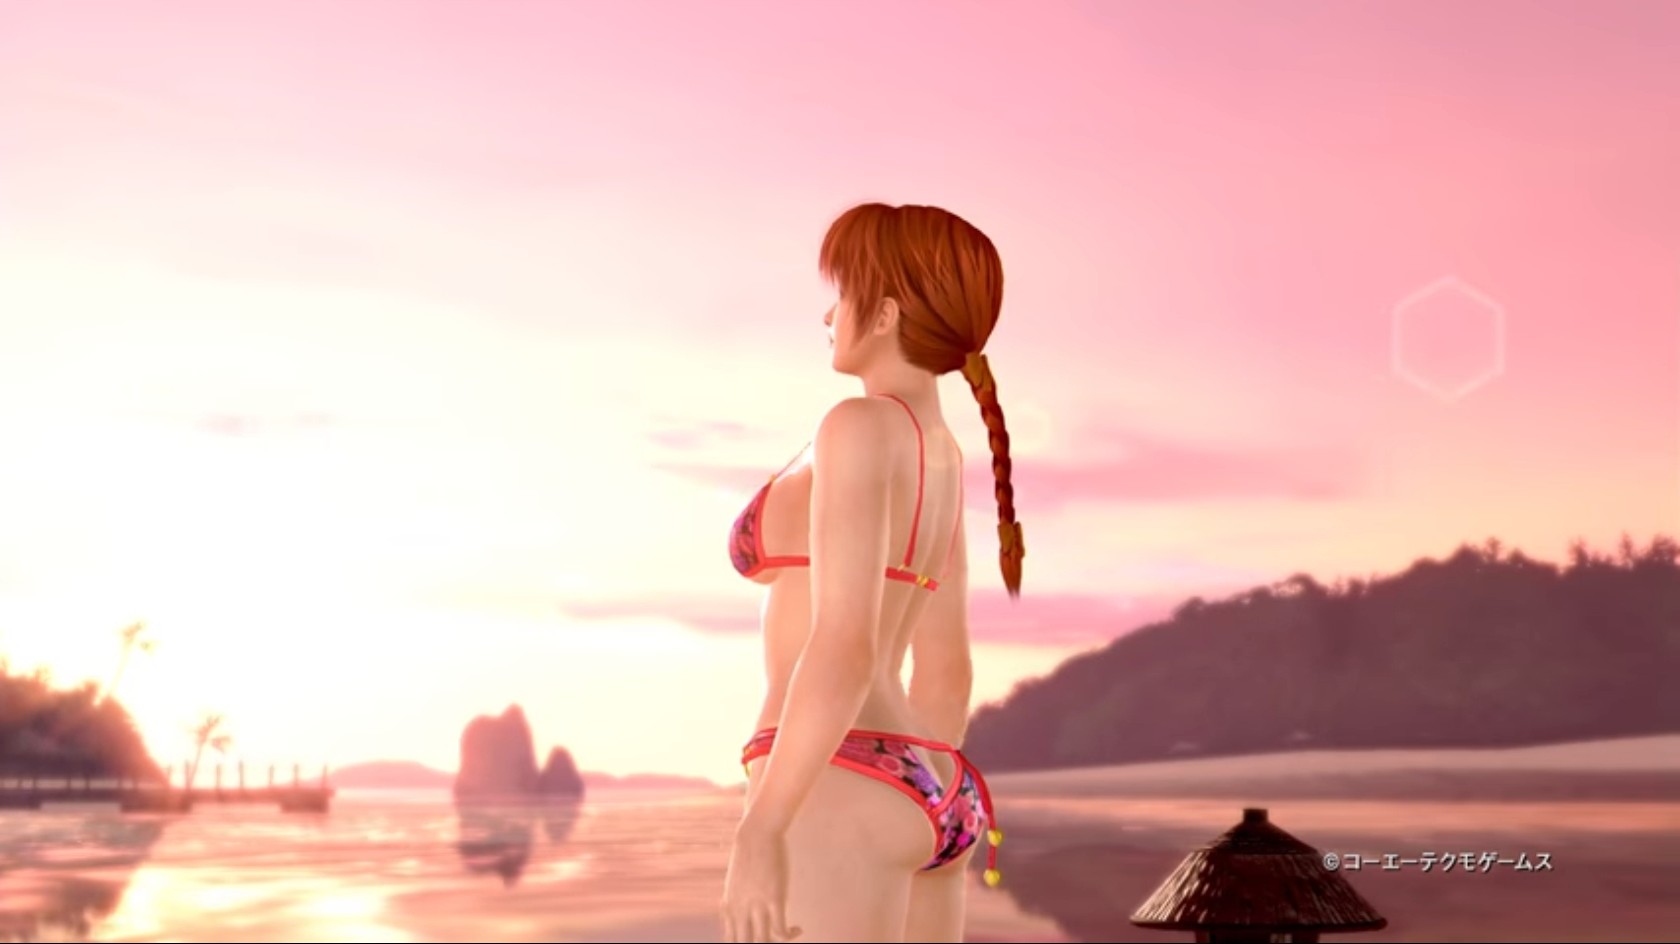 Dead or alive xtreme kasumi 10